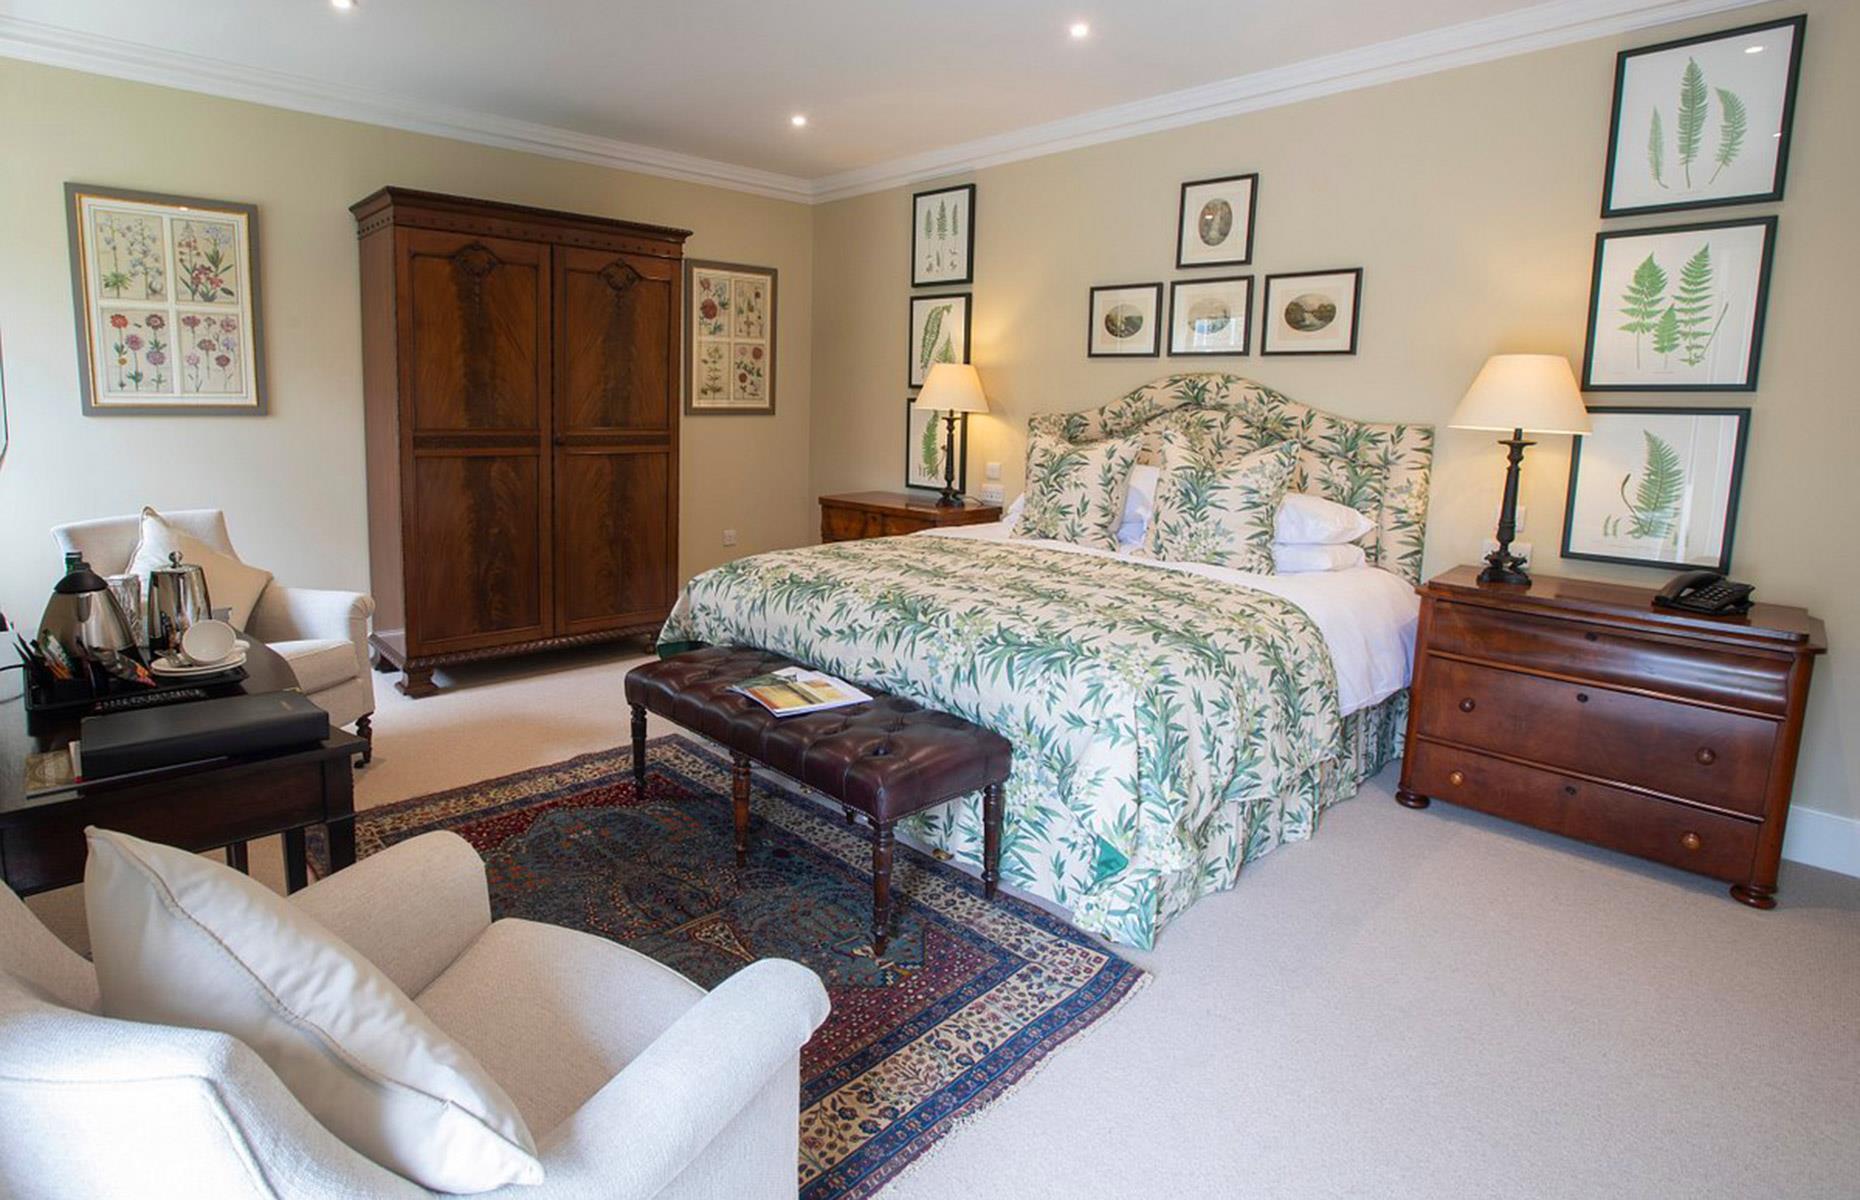 <p>Officially opened by King Charles in 2019, the former granary has been converted into a 10-bedroom bed and breakfast, nestled between the castle and the shore. The luxurious property, which contains this elegant bedroom, costs around <a href="http://hotels.cloudbeds.com/reservation/ZpuqD2#checkin=2024-08-12&checkout=2024-08-19">£2,000 ($2.5k)</a> for seven nights in August.</p>  <p>Offering views out across the Pentland Firth towards Orkney, visitors can enjoy spectacular sunsets and, if they’re lucky, views of the Northern Lights.</p>